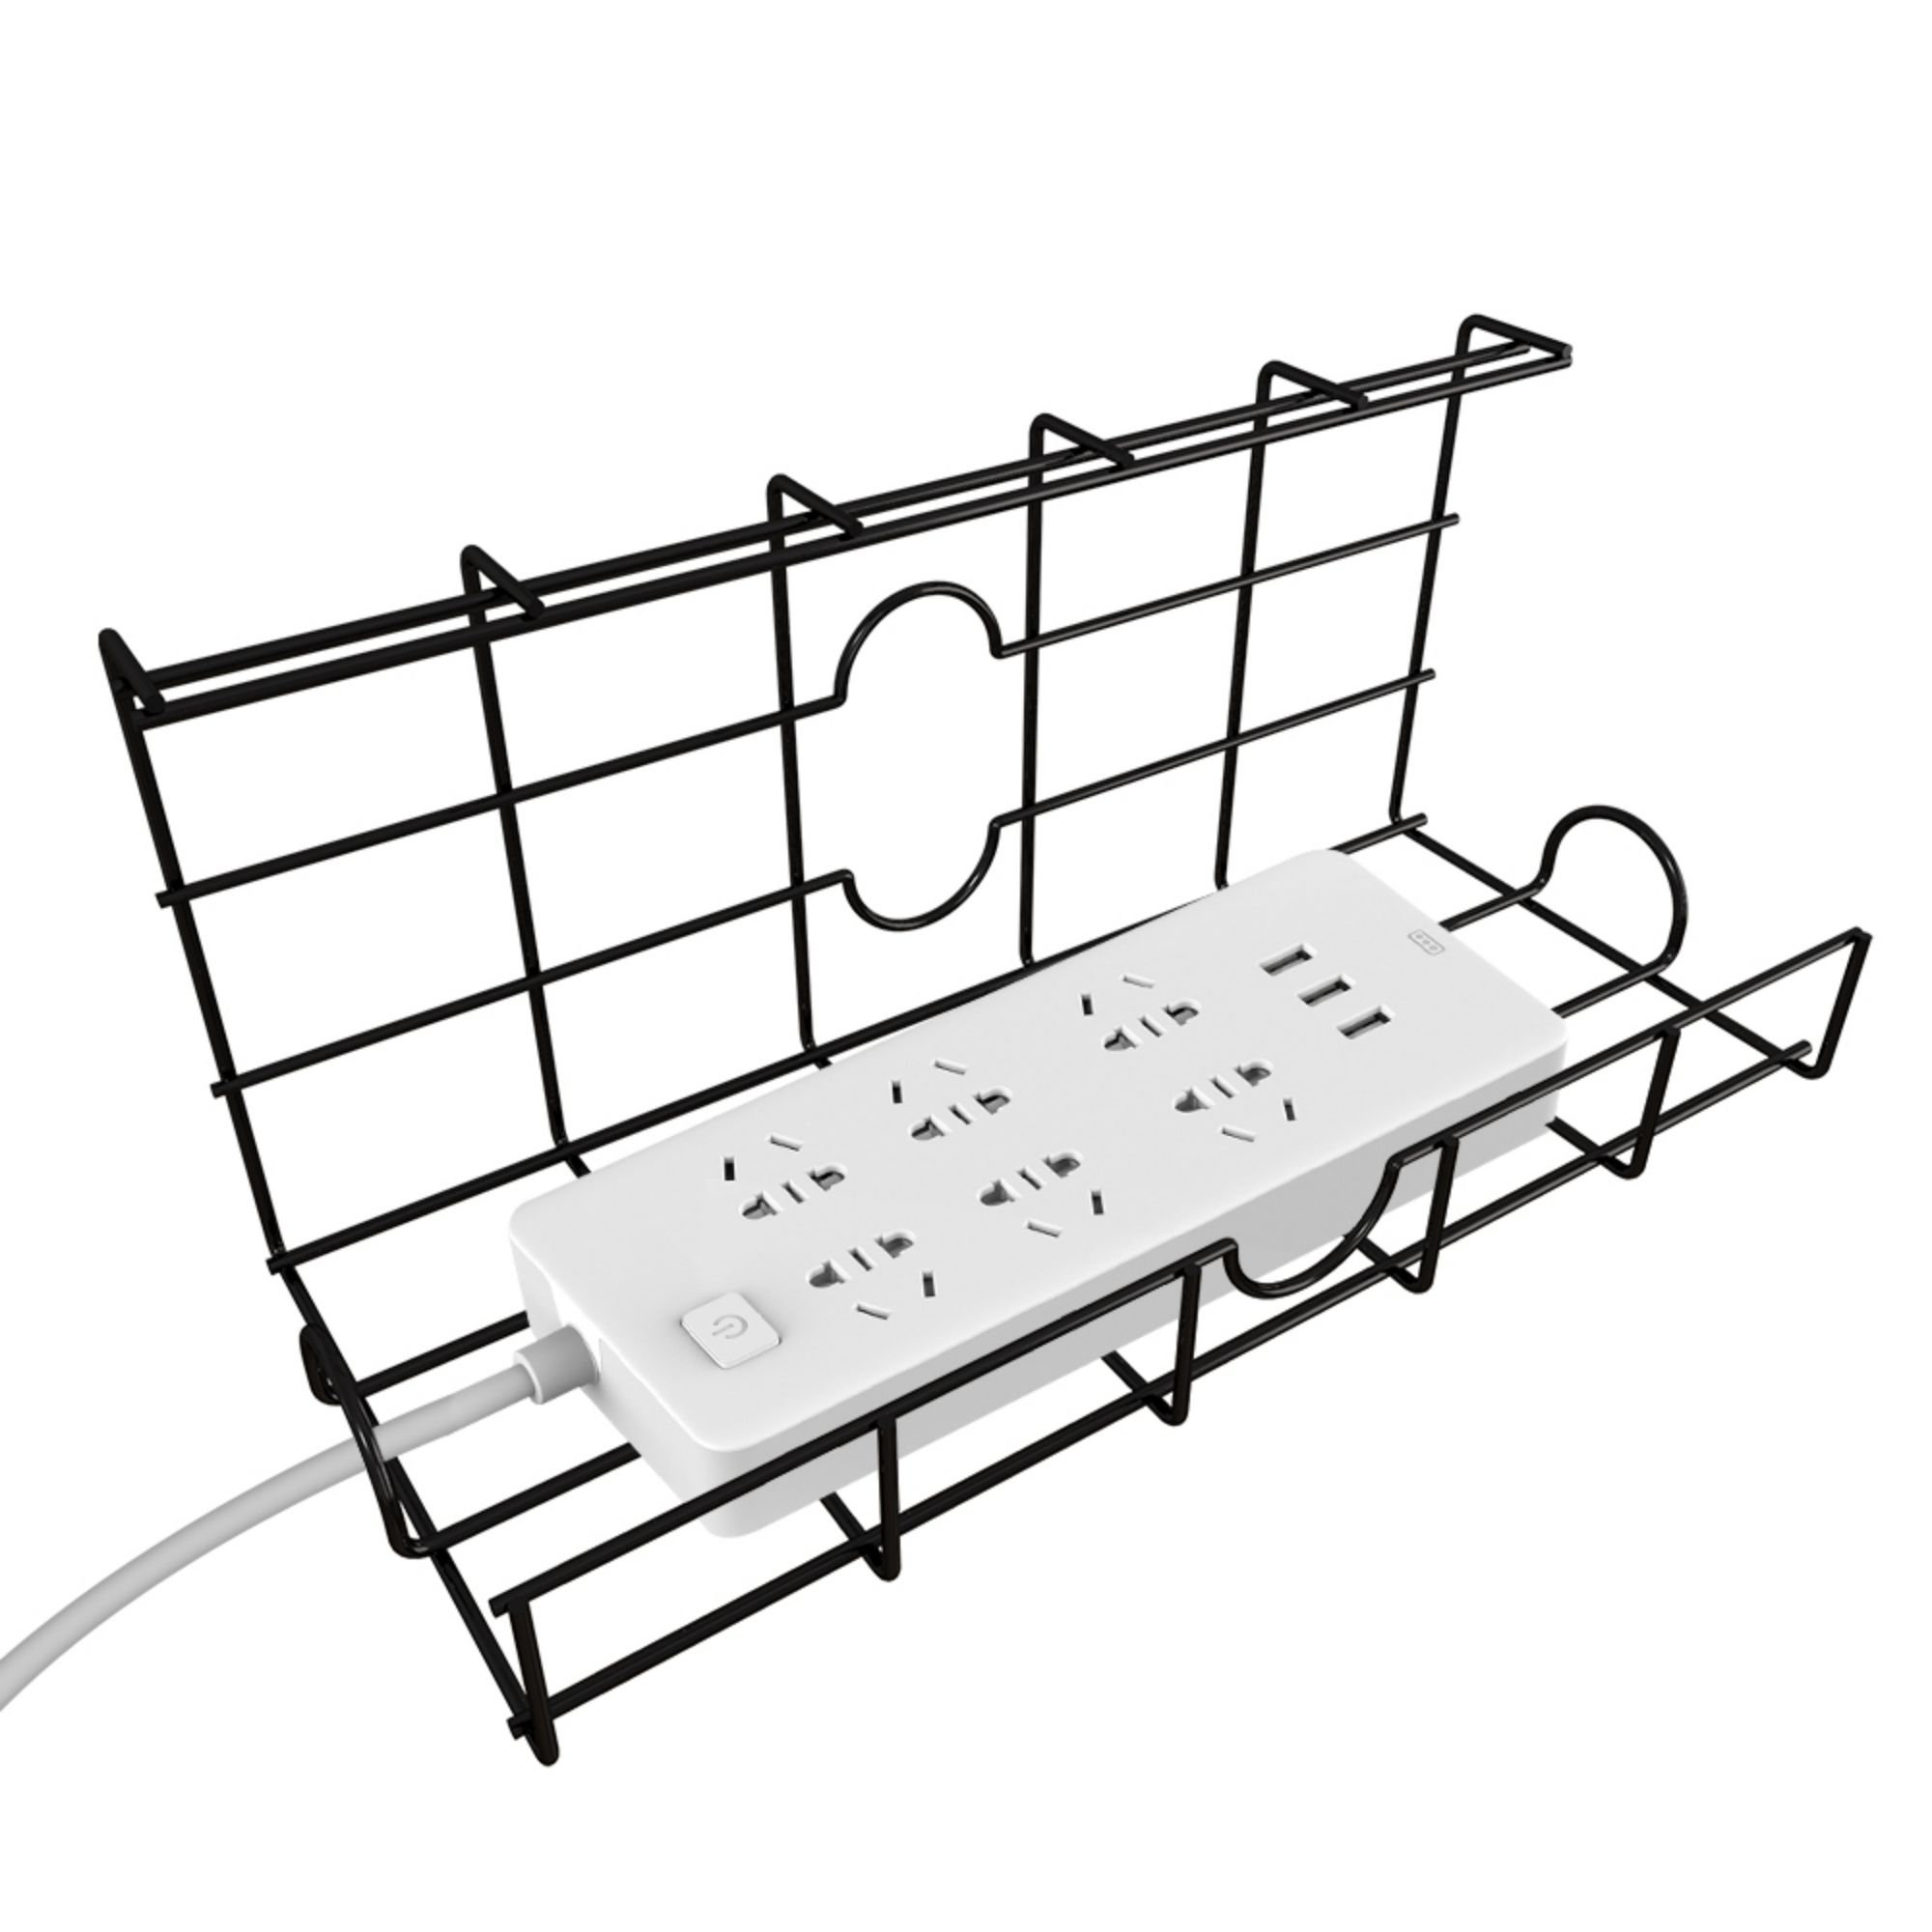 2 Pack Under Shelf Cable Management Tray, Metal Wirecable Organizer for Office and Home,Inside Alex Smart Home